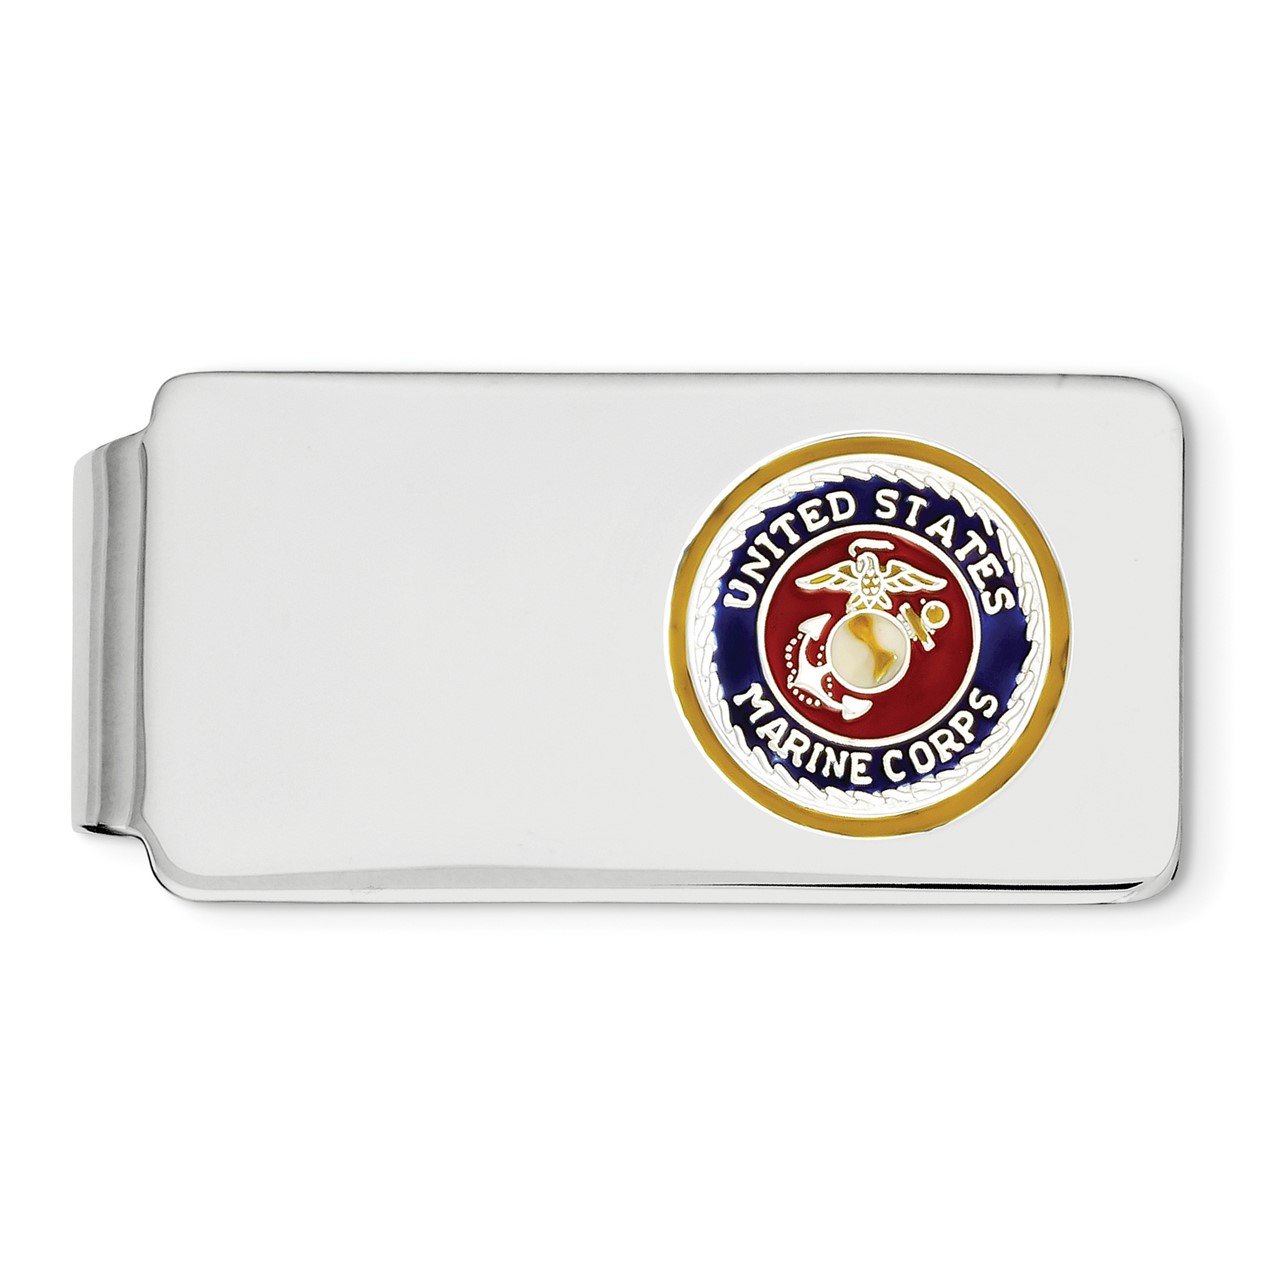 Sterling Silver Rhodium U.S. Marine Corp Money Clip with gold border, silver